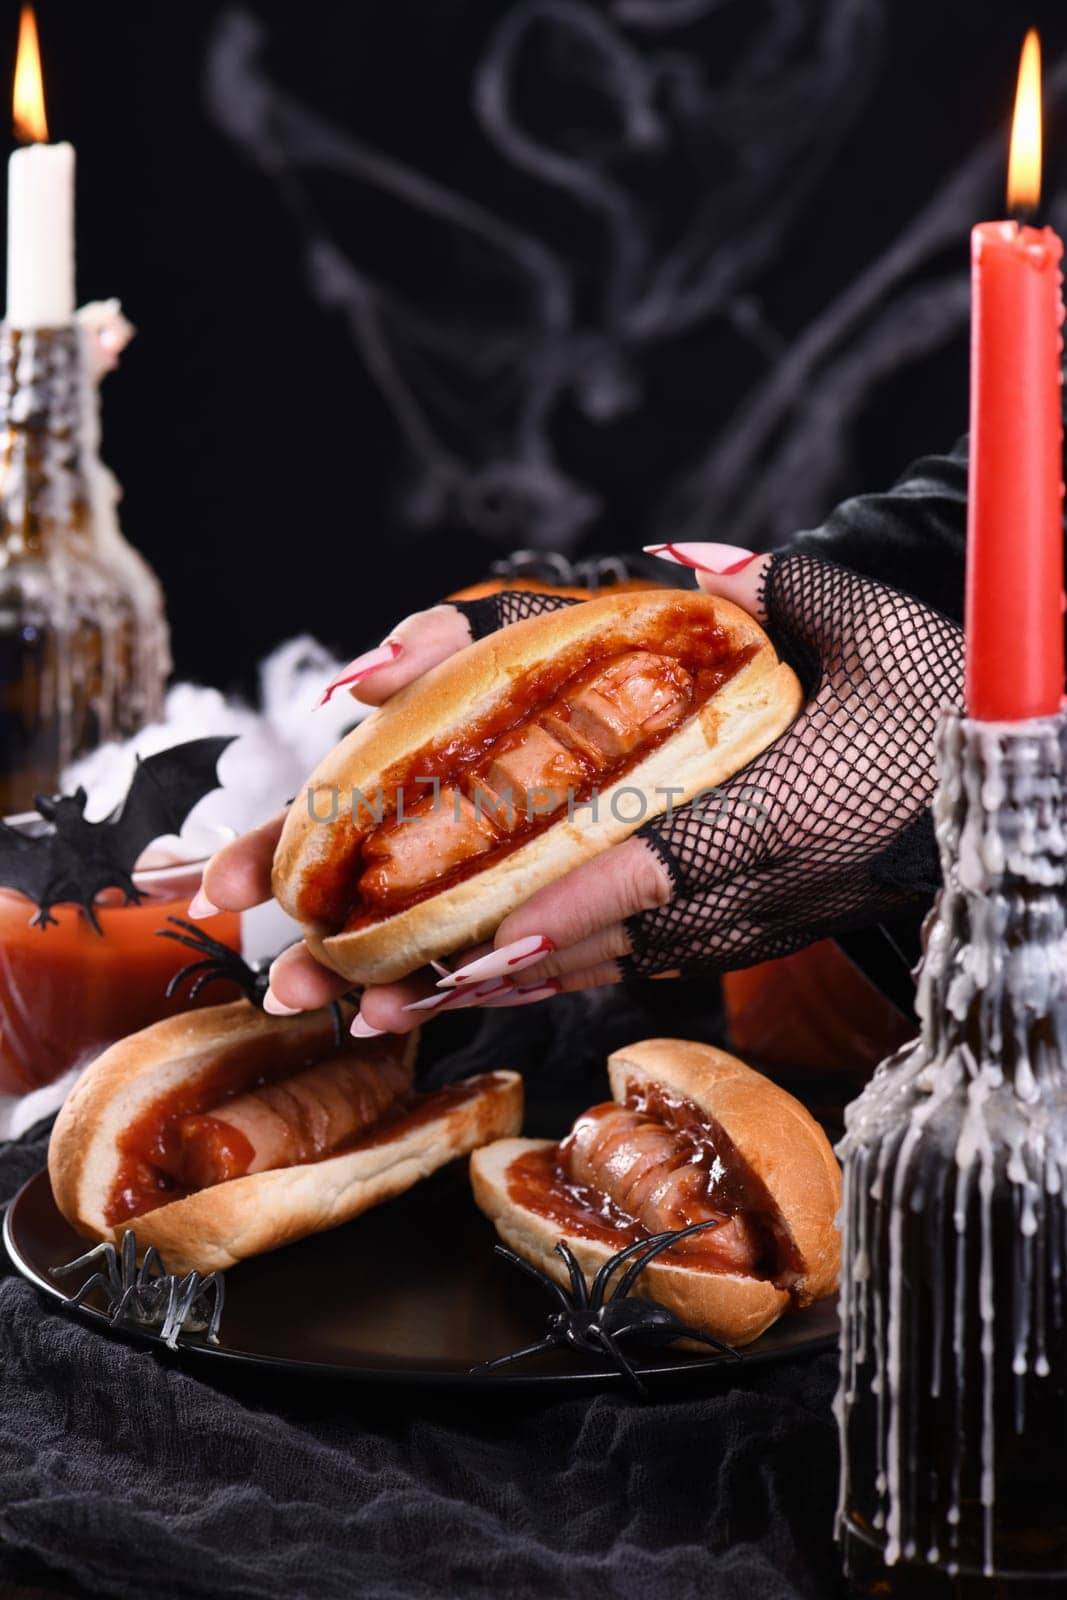  Hot dog Bloody fingers in the hands of a witch. Halloween appetizer